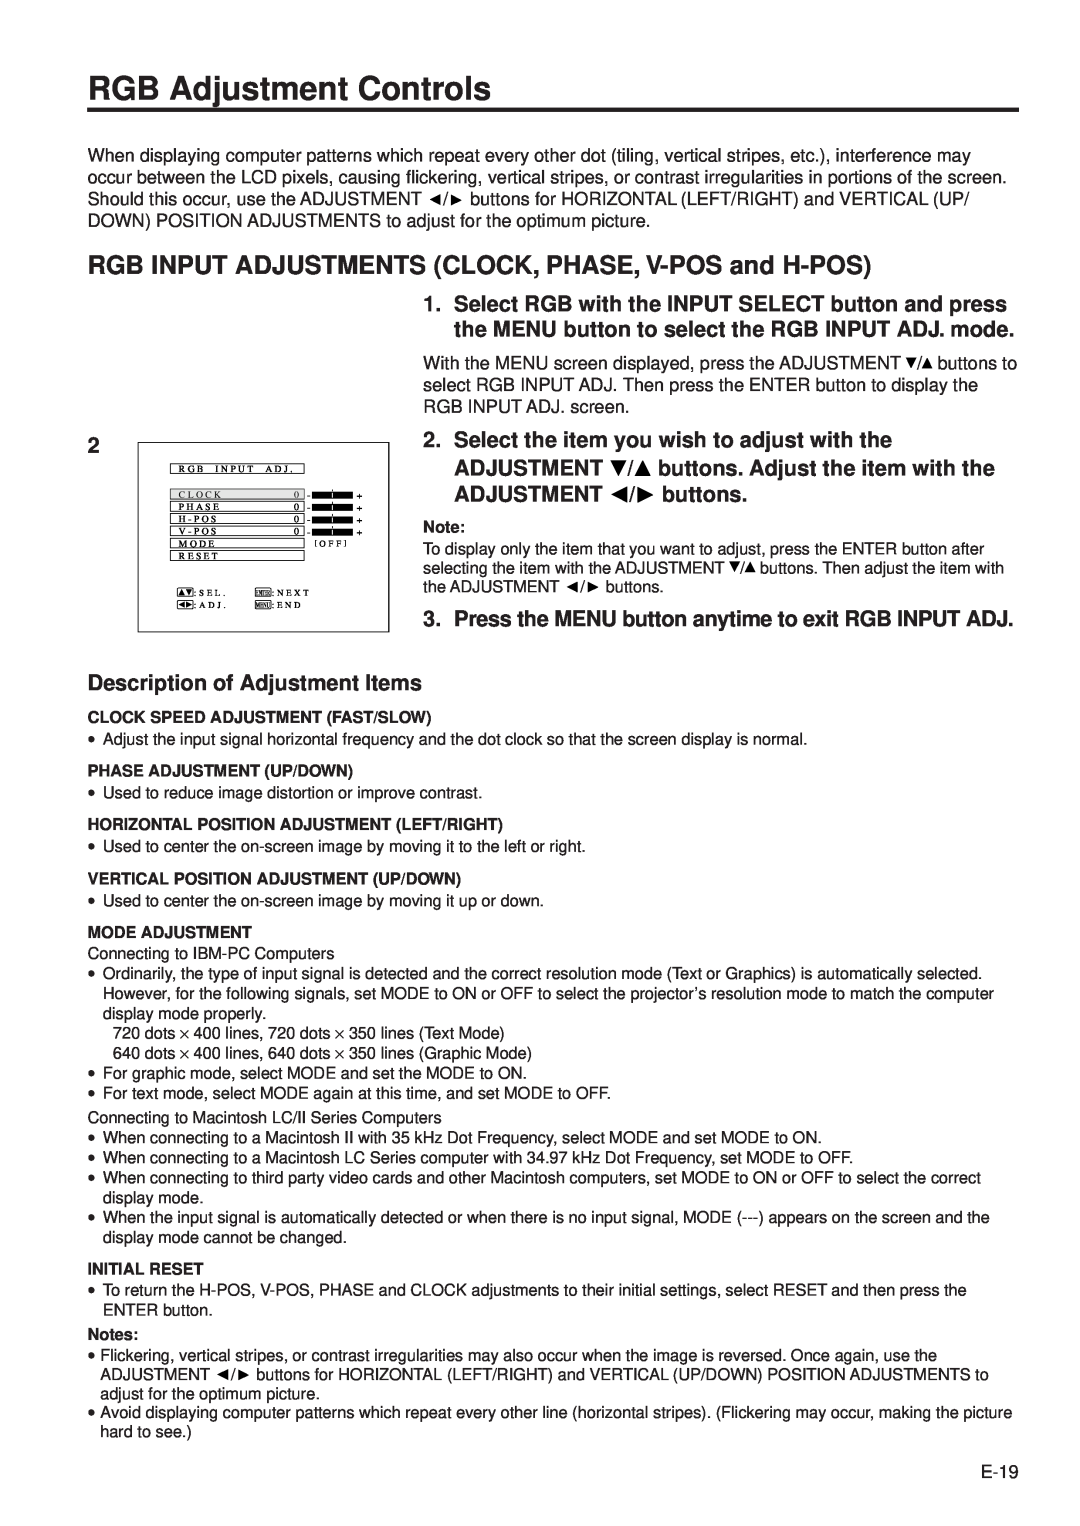 Sharp PG-D100U RGB Adjustment Controls, Select the item you wish to adjust with the, Description of Adjustment Items 